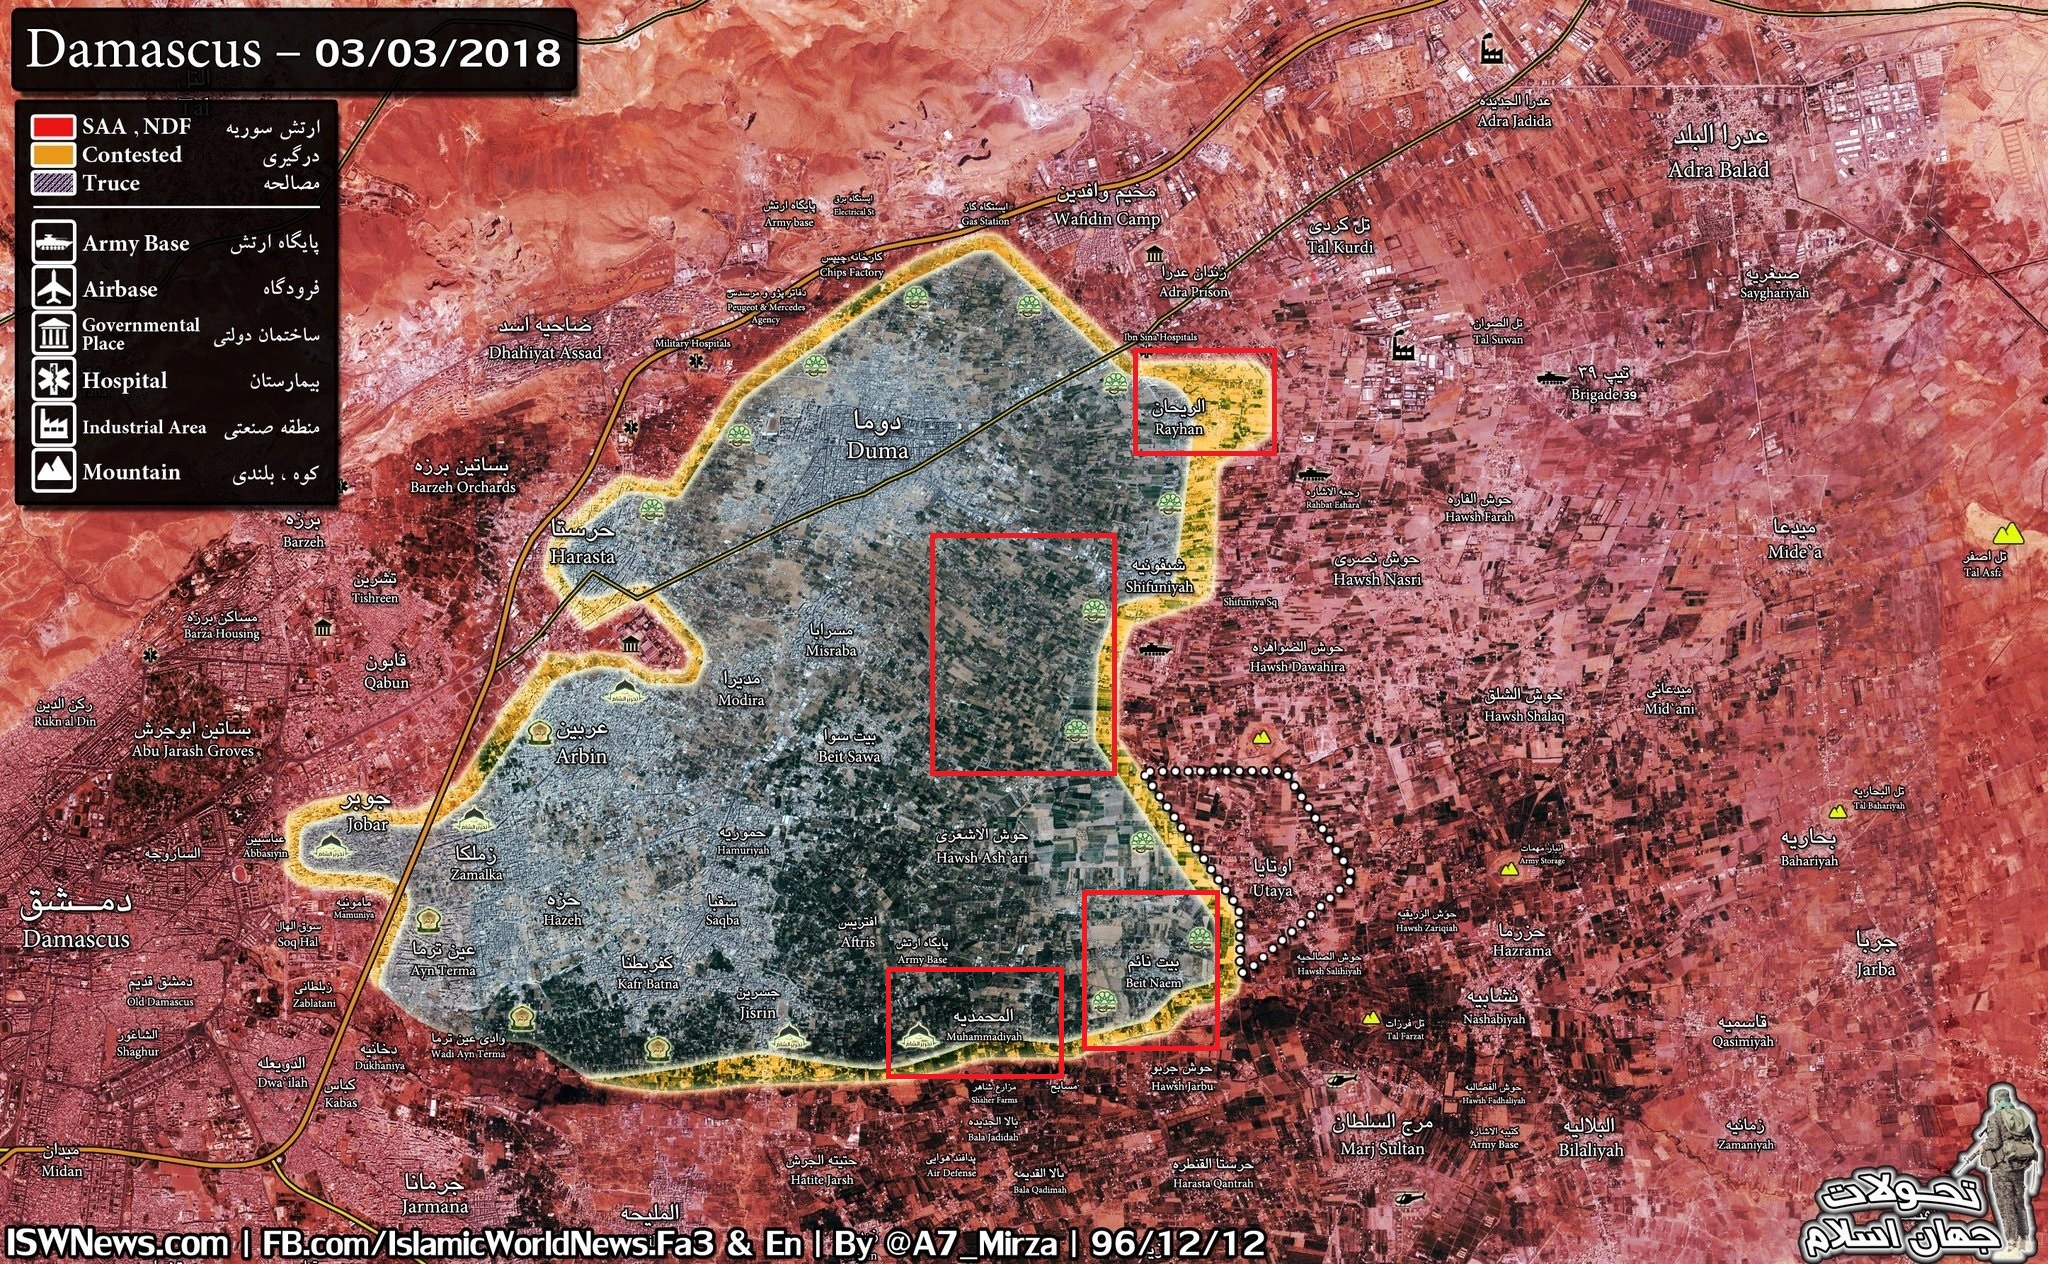 Syrian Army Achieves Significant Success In East Ghouta as Jaysh al-Islam's Defense Collapses (Video, Map)